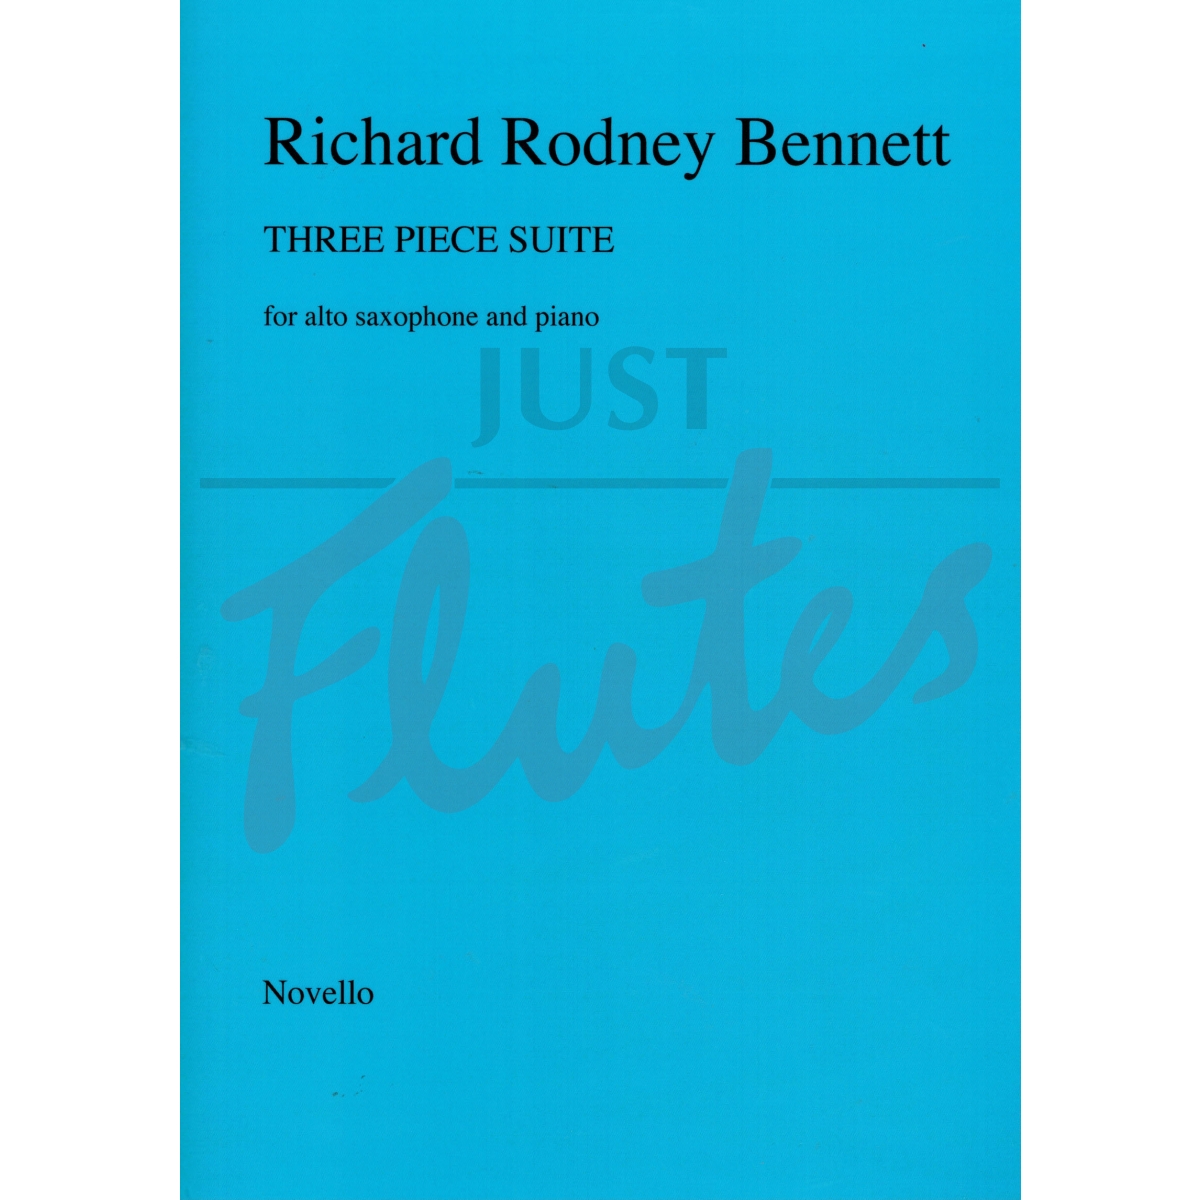 Three Piece Suite for Alto Saxophone and Piano